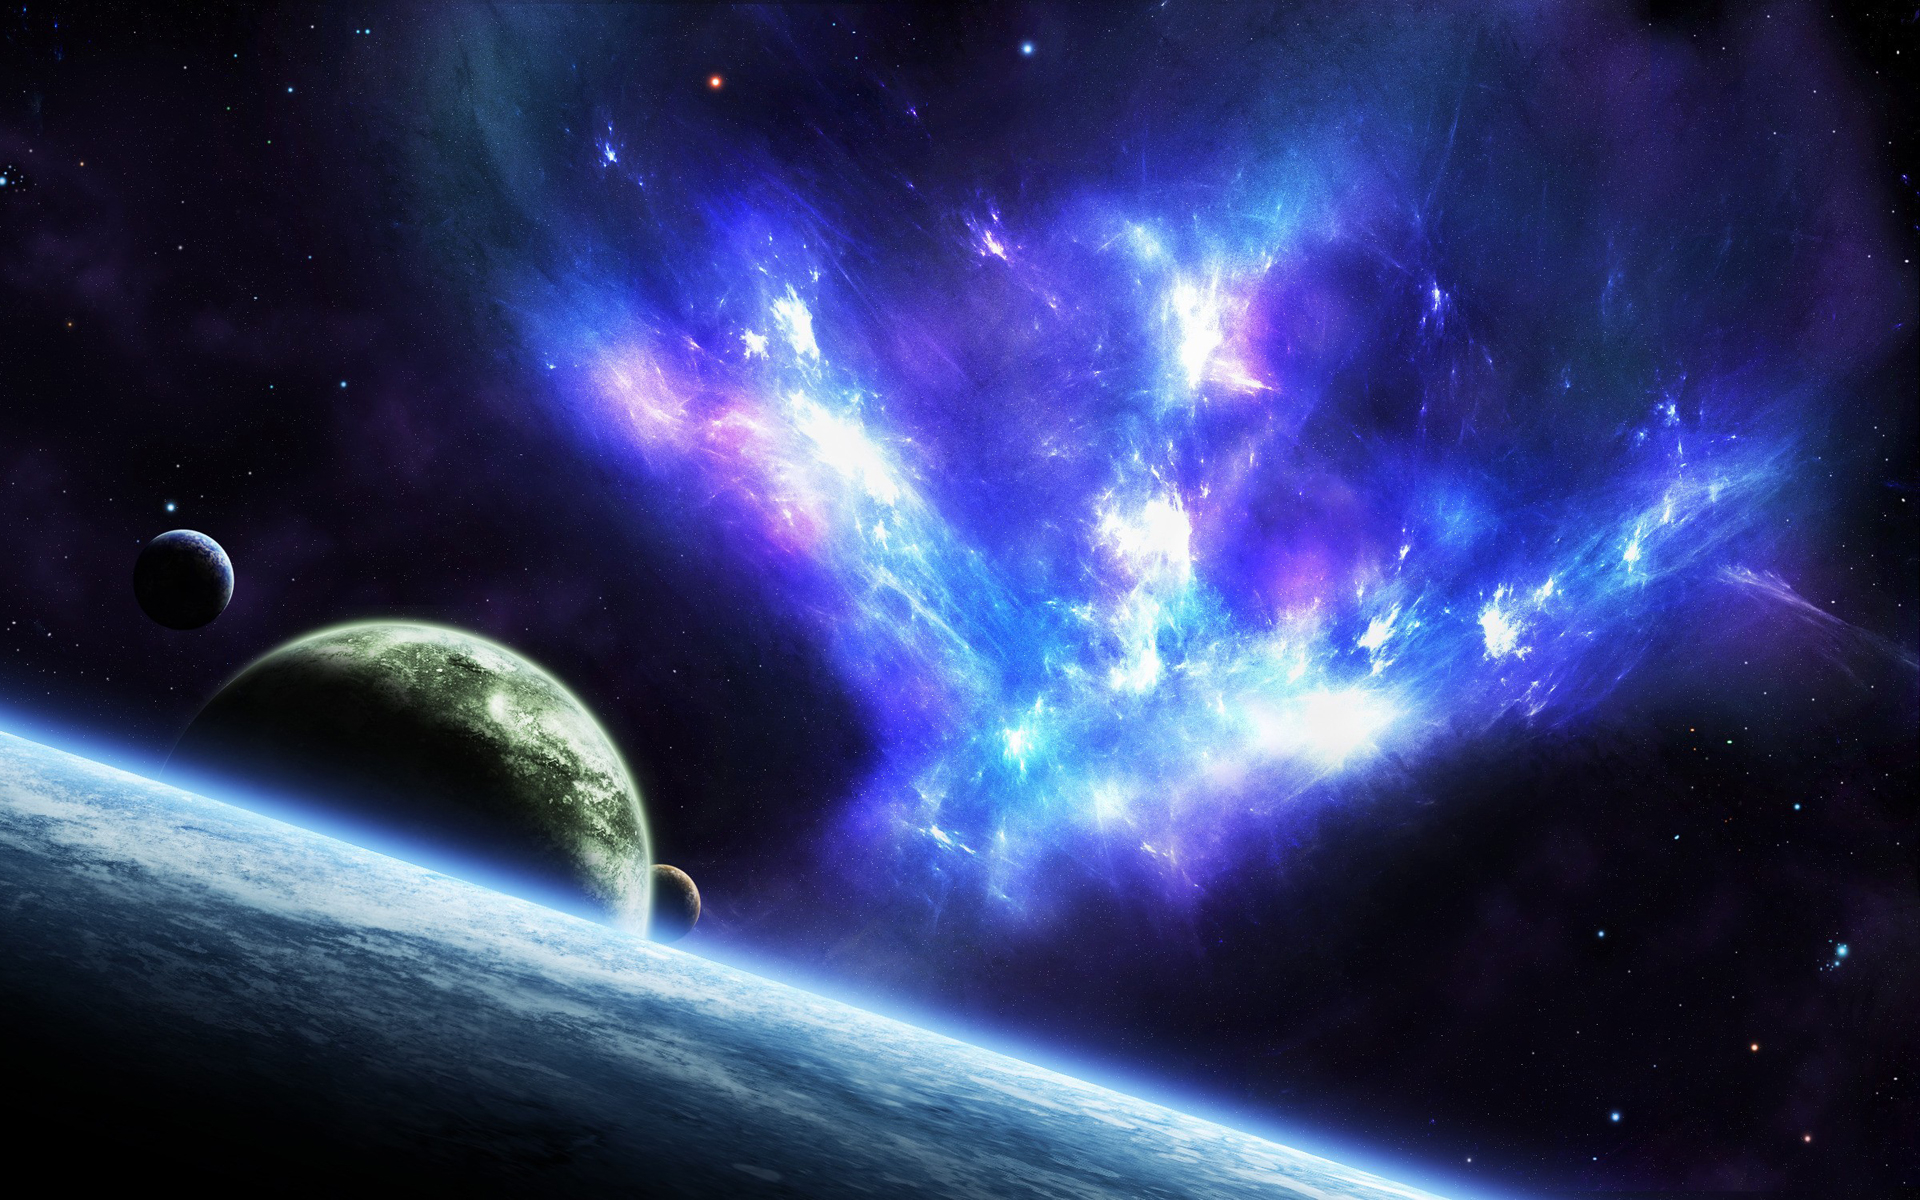 Amazing Glow Wallpaper - Art Space Stars And Planets - HD Wallpaper 